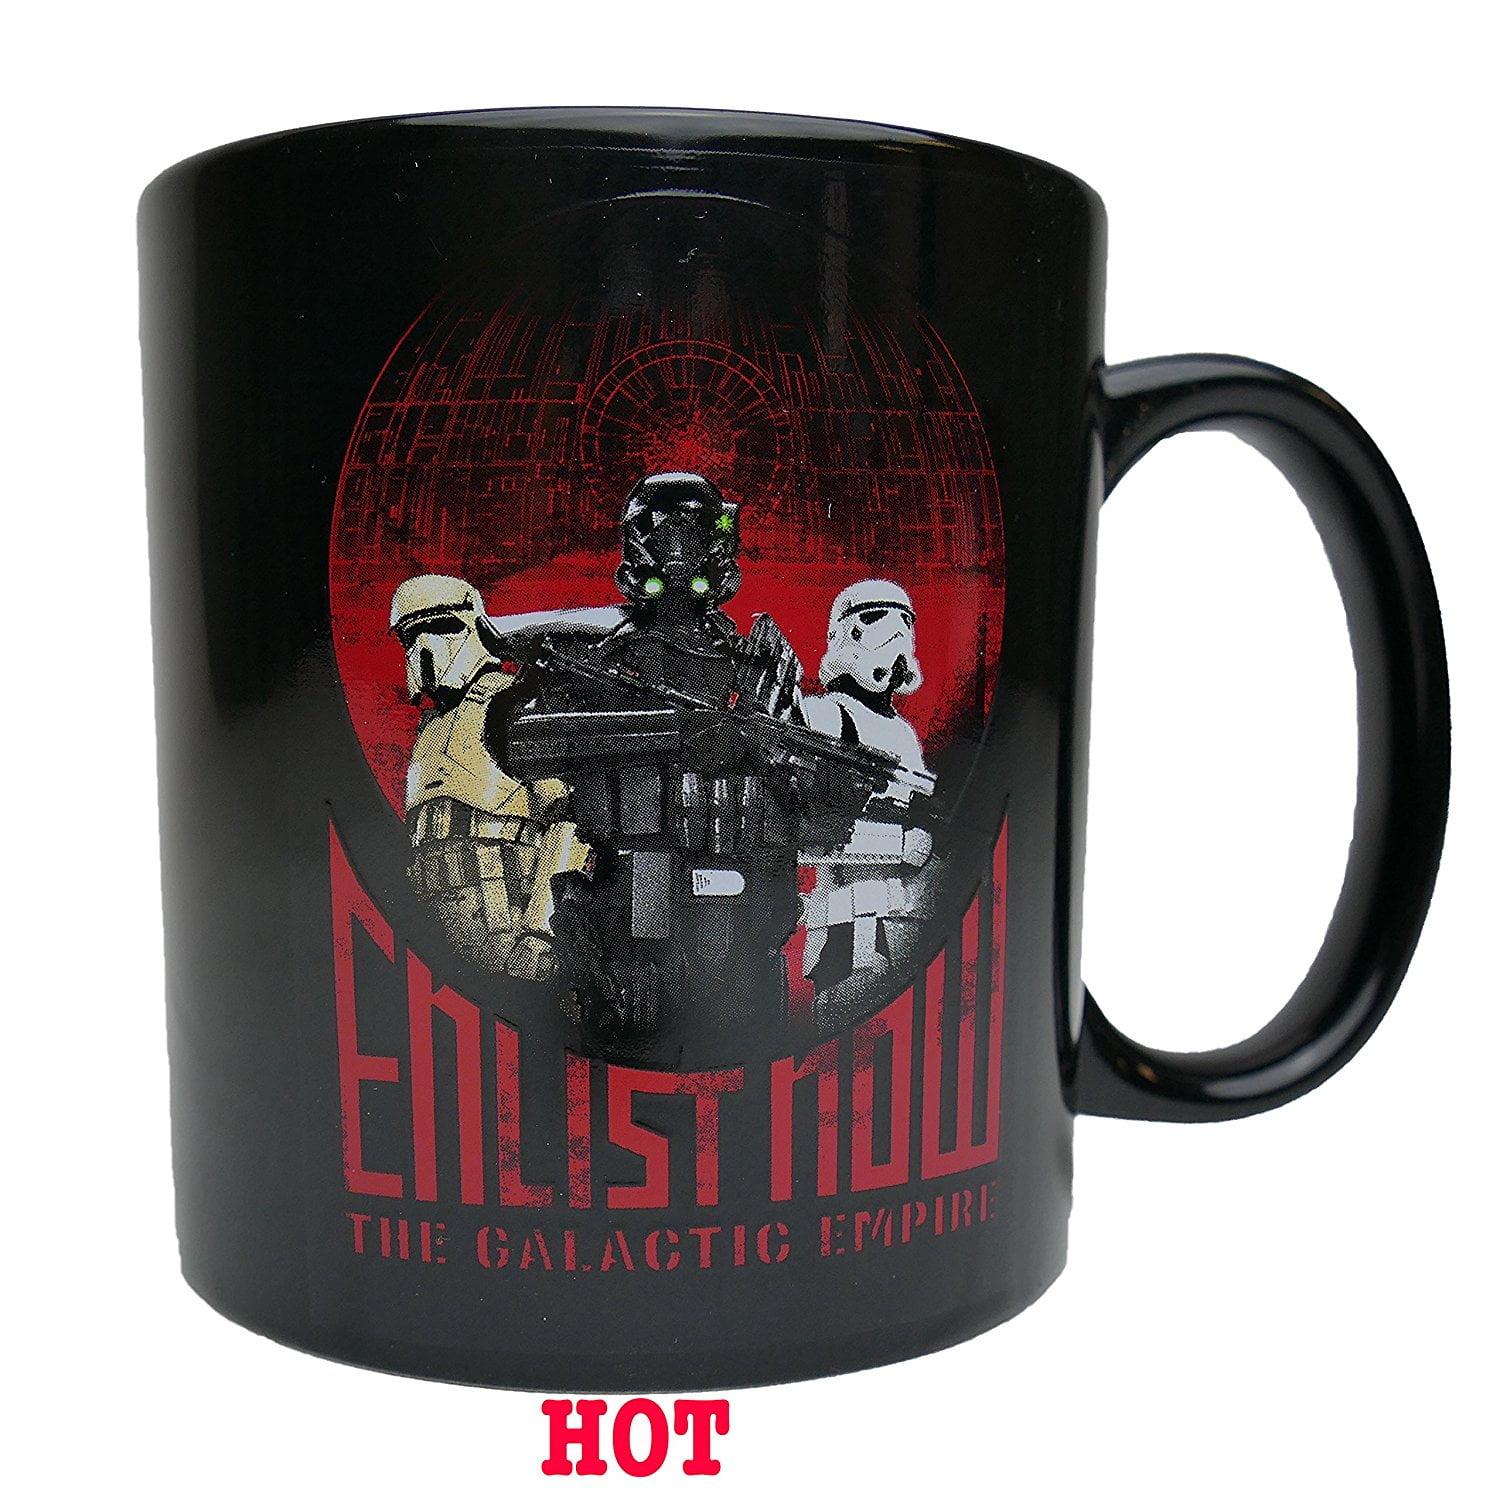 NEW Star Wars Imperial Death Trooper Mug Cup Rogue One Disney Store In Box Storm 